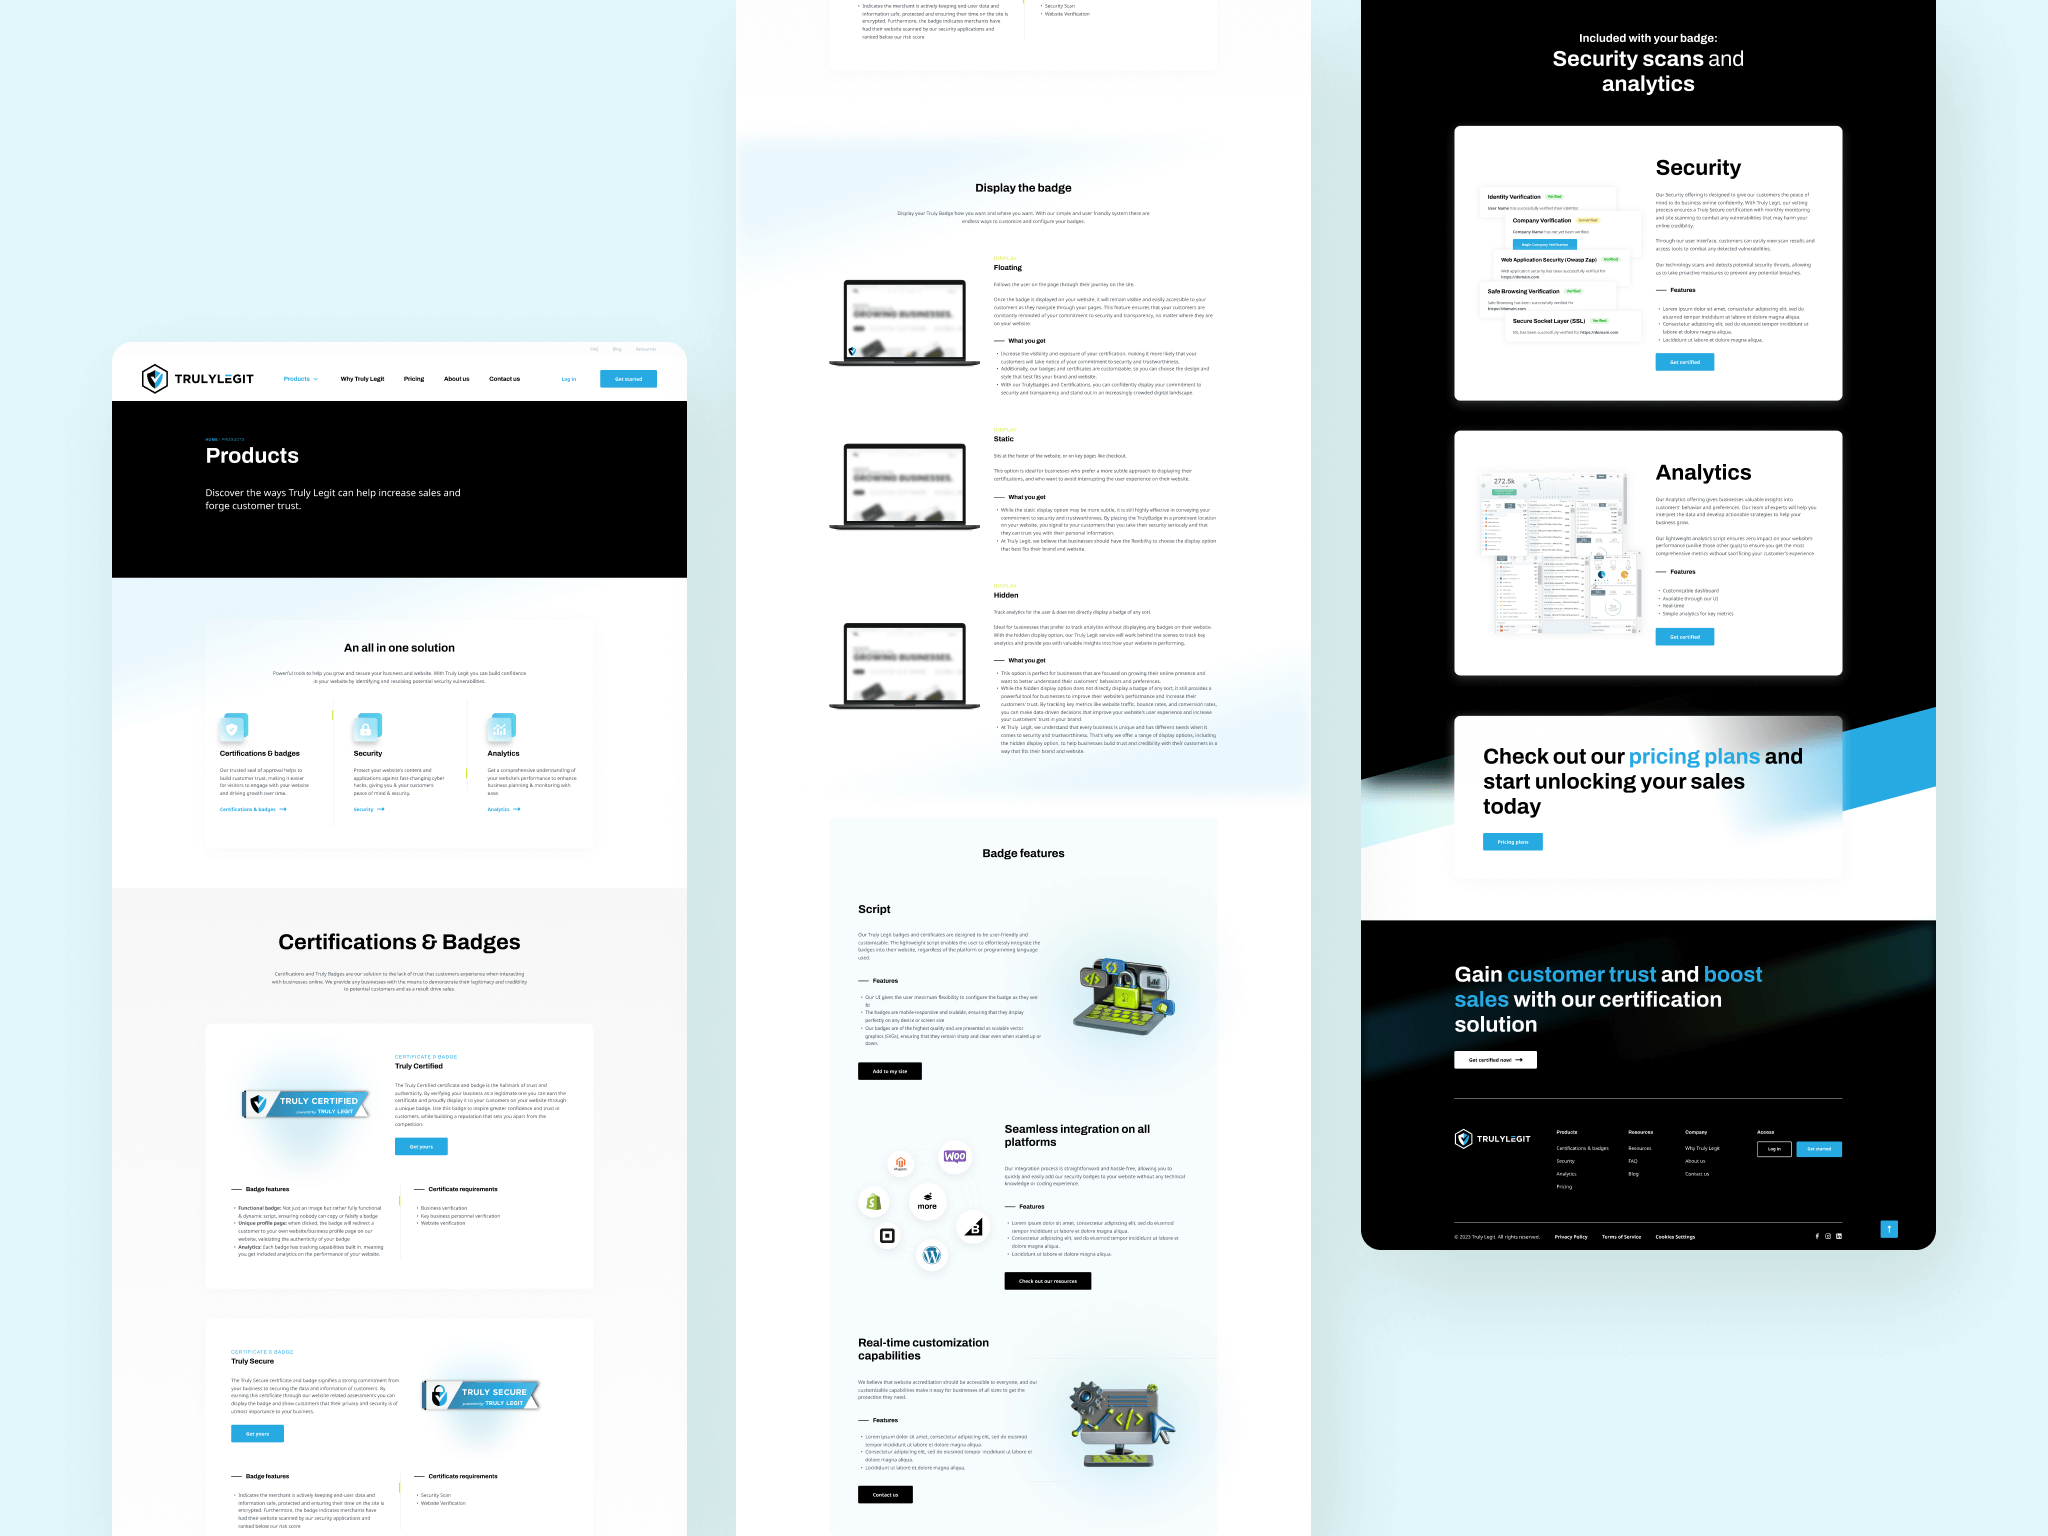 Truly Legit - secondary page design